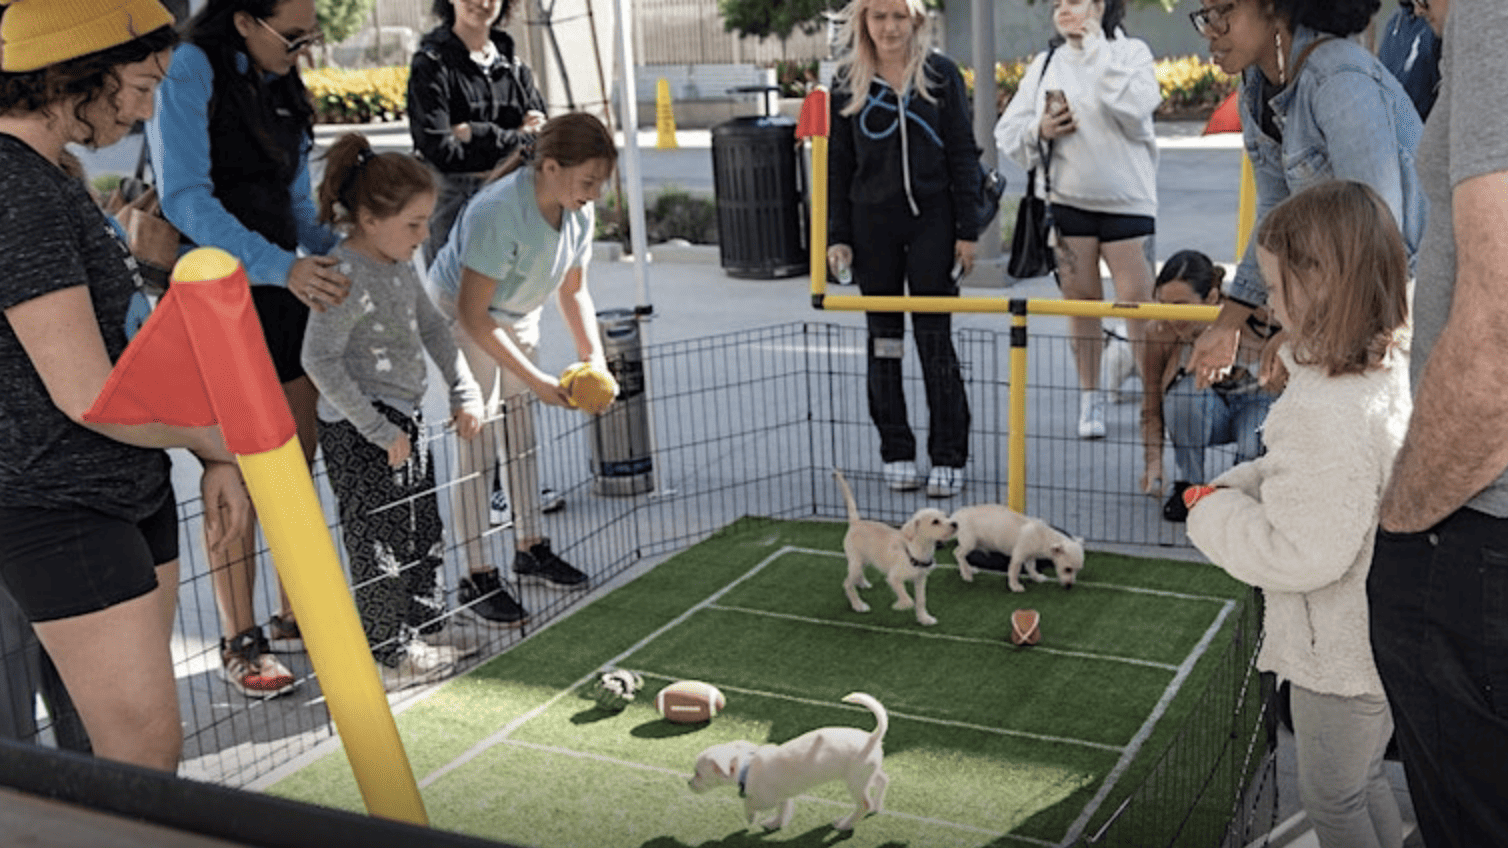 A group of people playing with dogs on a tennis court in Culver City during the Pup-er Bowl event. - Dogtrekker